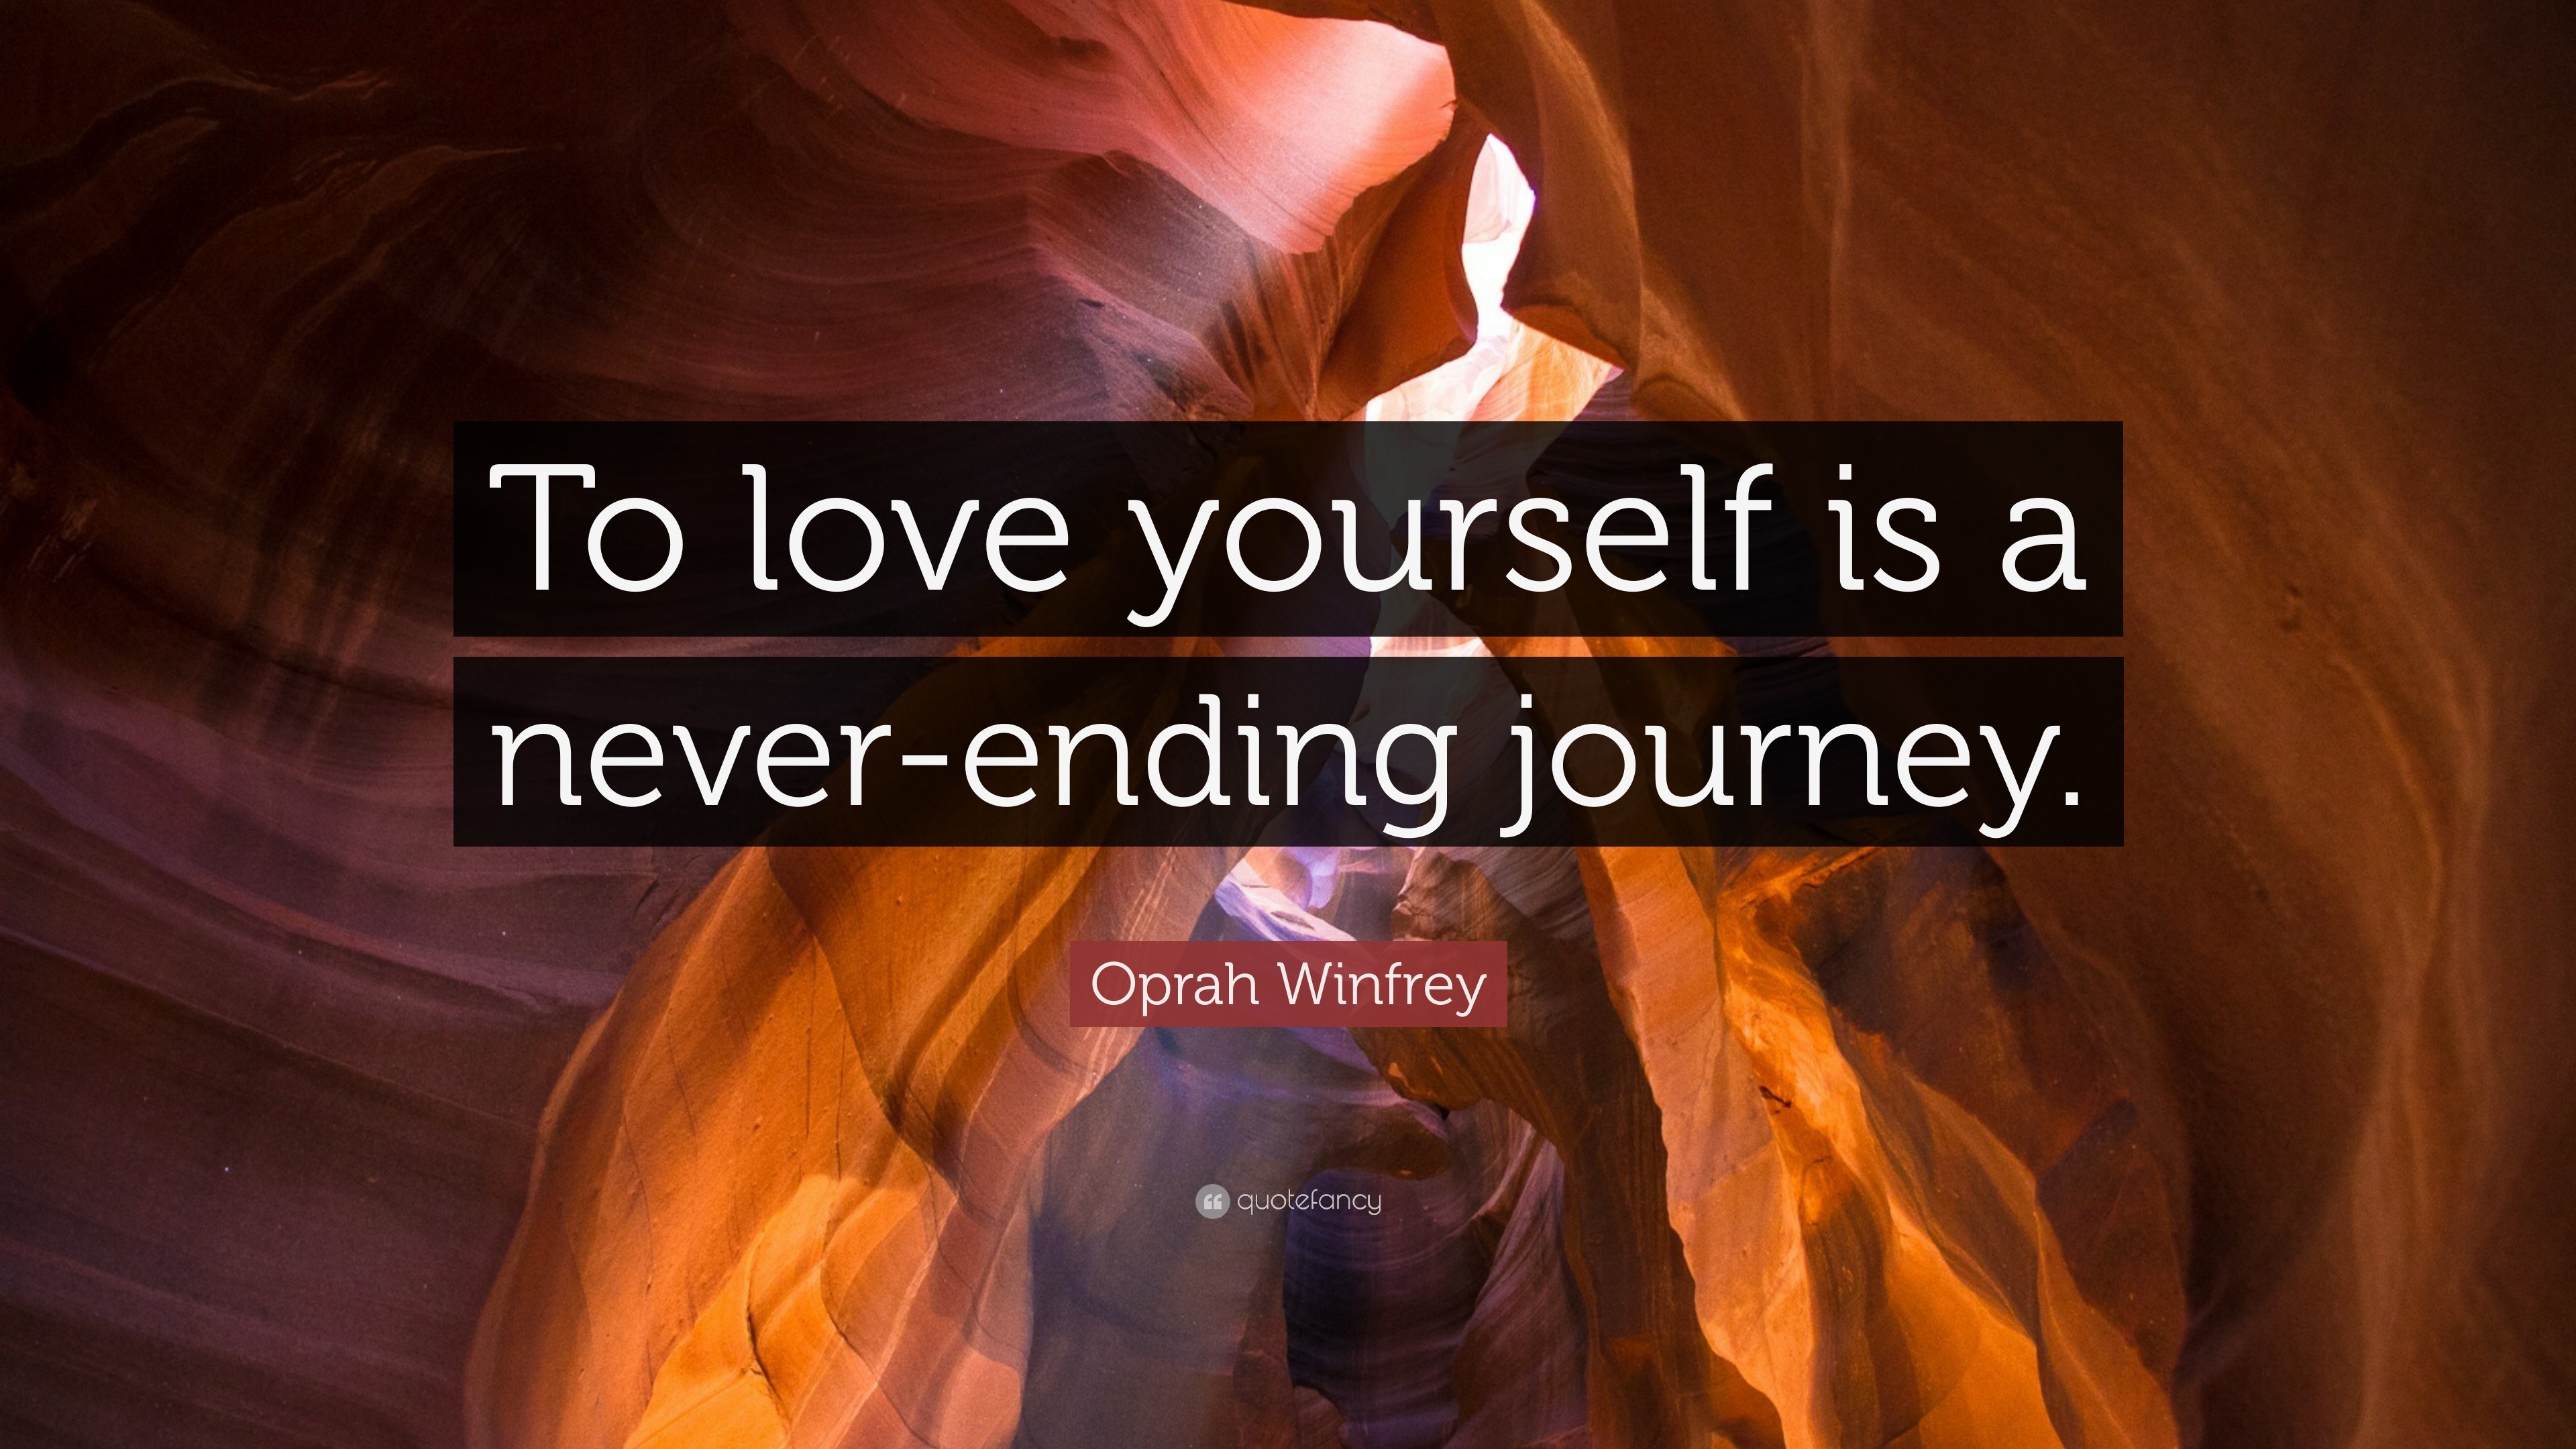 Oprah Winfrey Quote: "To love yourself is a never-ending journey." (12 wallpapers) - Quotefancy